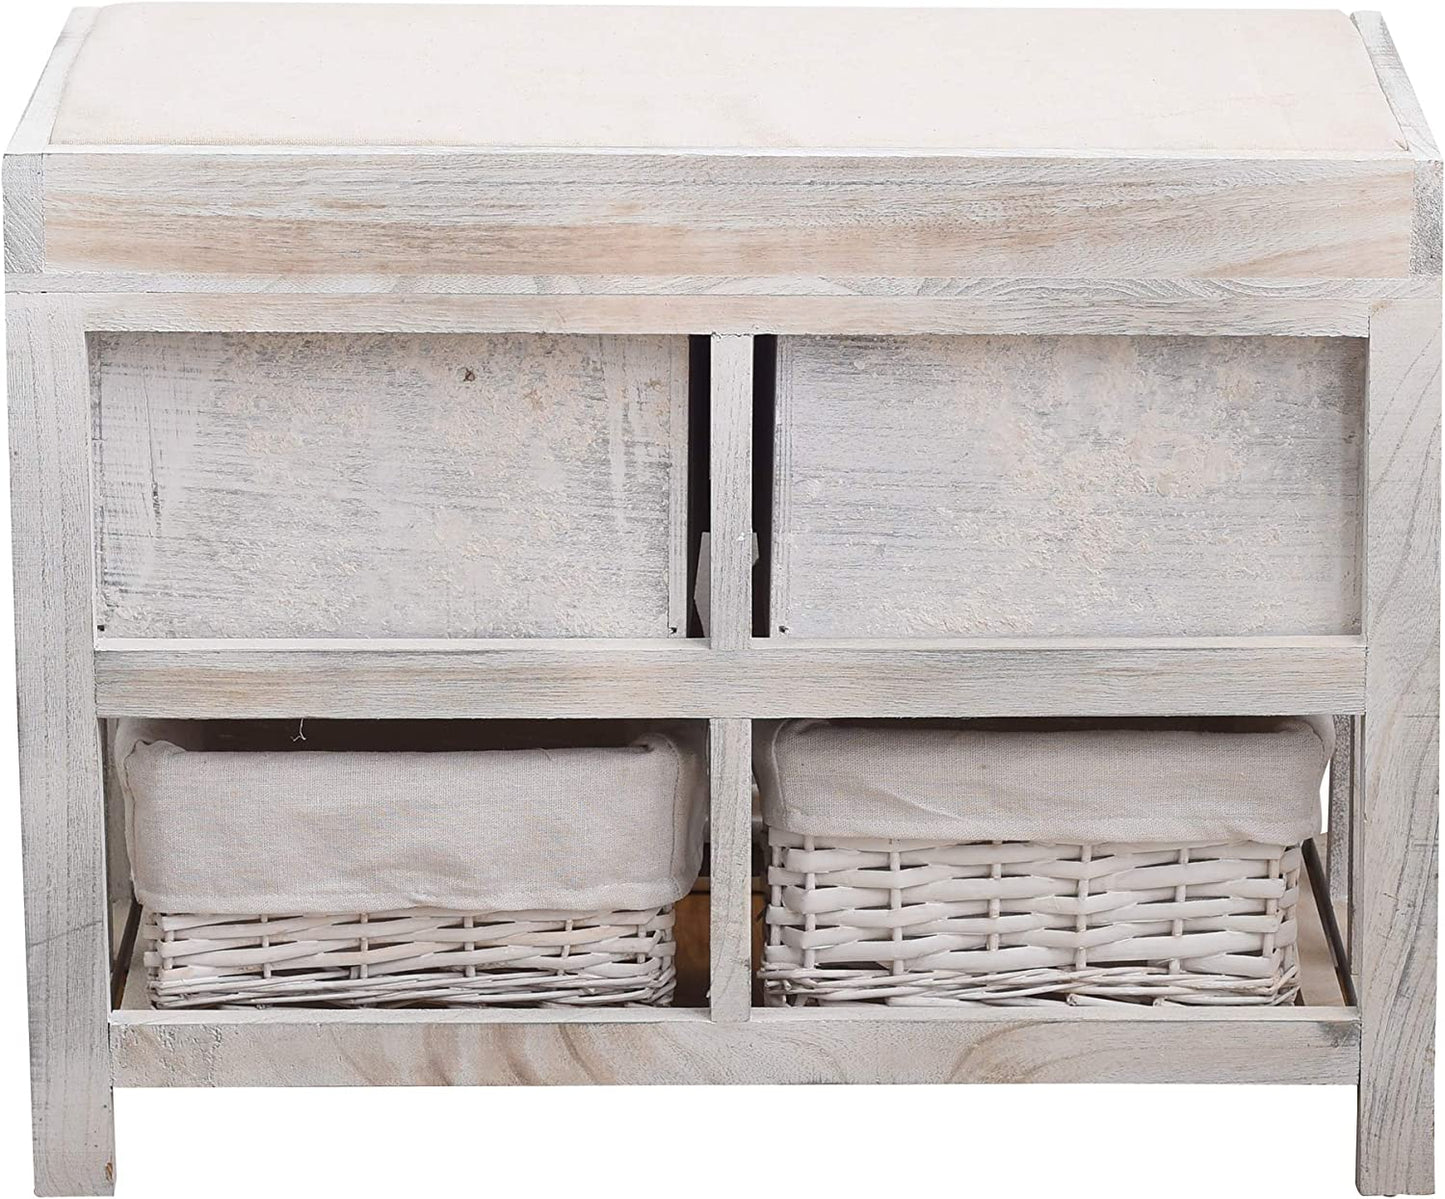 Rebecca Mobili Bench Seat Storage Unit with 2 Drawers Wood White Natural Vintage Bathroom Hall - 46 X 60 X 30 Cm (H X W X D) - Art. RE4553